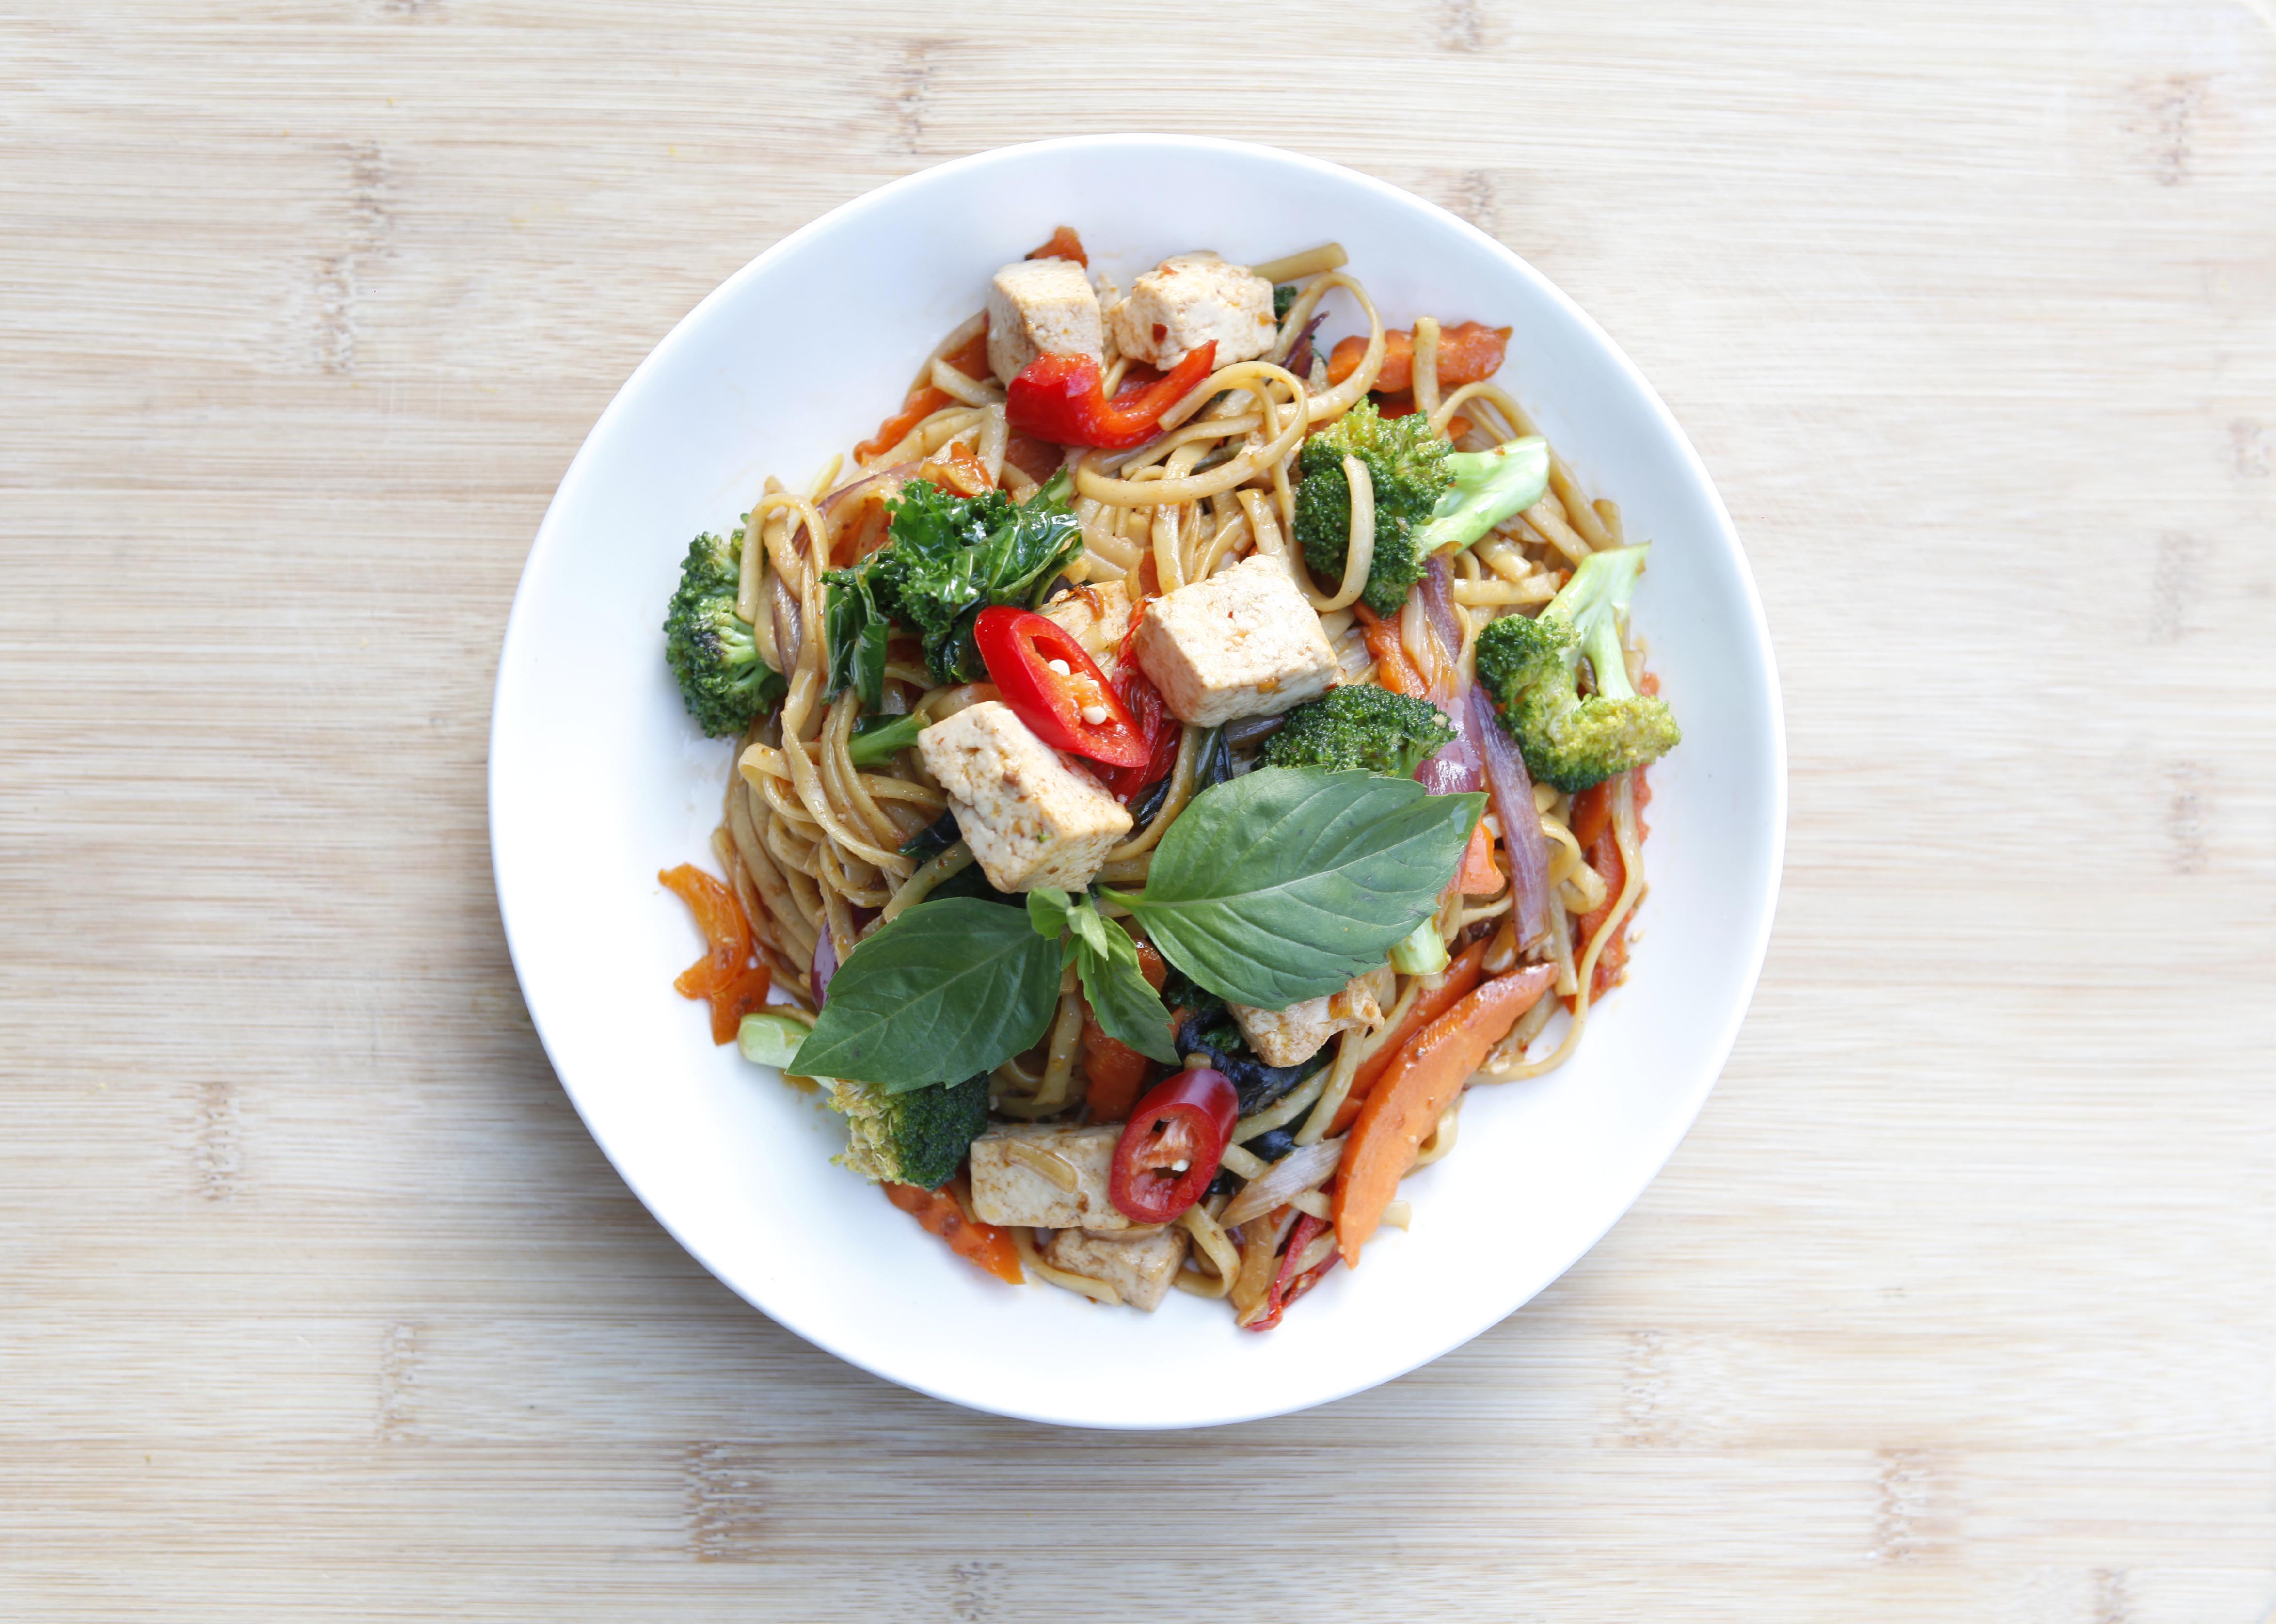 Savory and spicy Thai fusion linguine pasta with broccoli, carrot, chili pepper, tofu and basil, also known as drunken linguine.